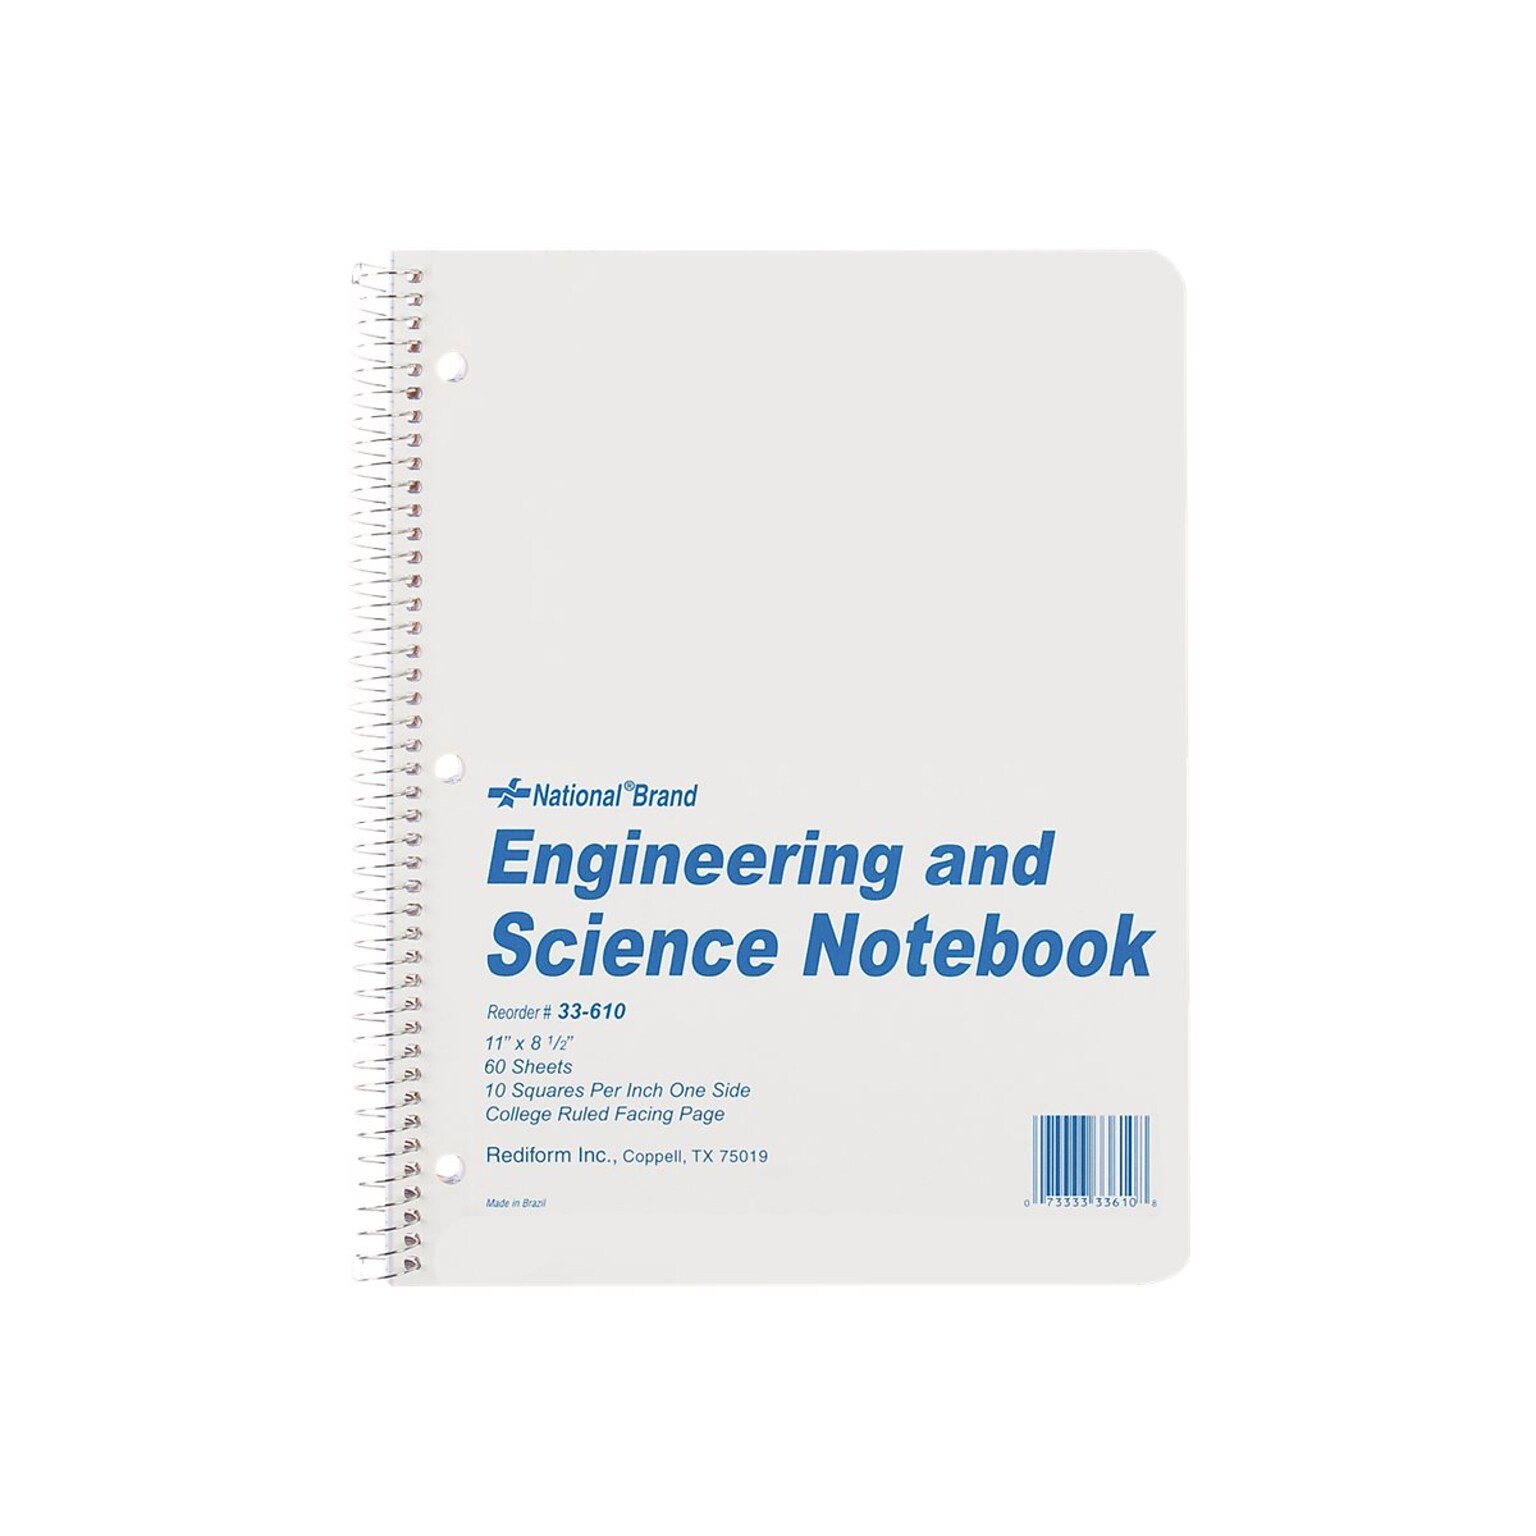 National Brand Engineering & Science 1-Subject Computation Notebooks, 8.5 x 11, Quad, 60 Sheets, Gray/Silver (33610)